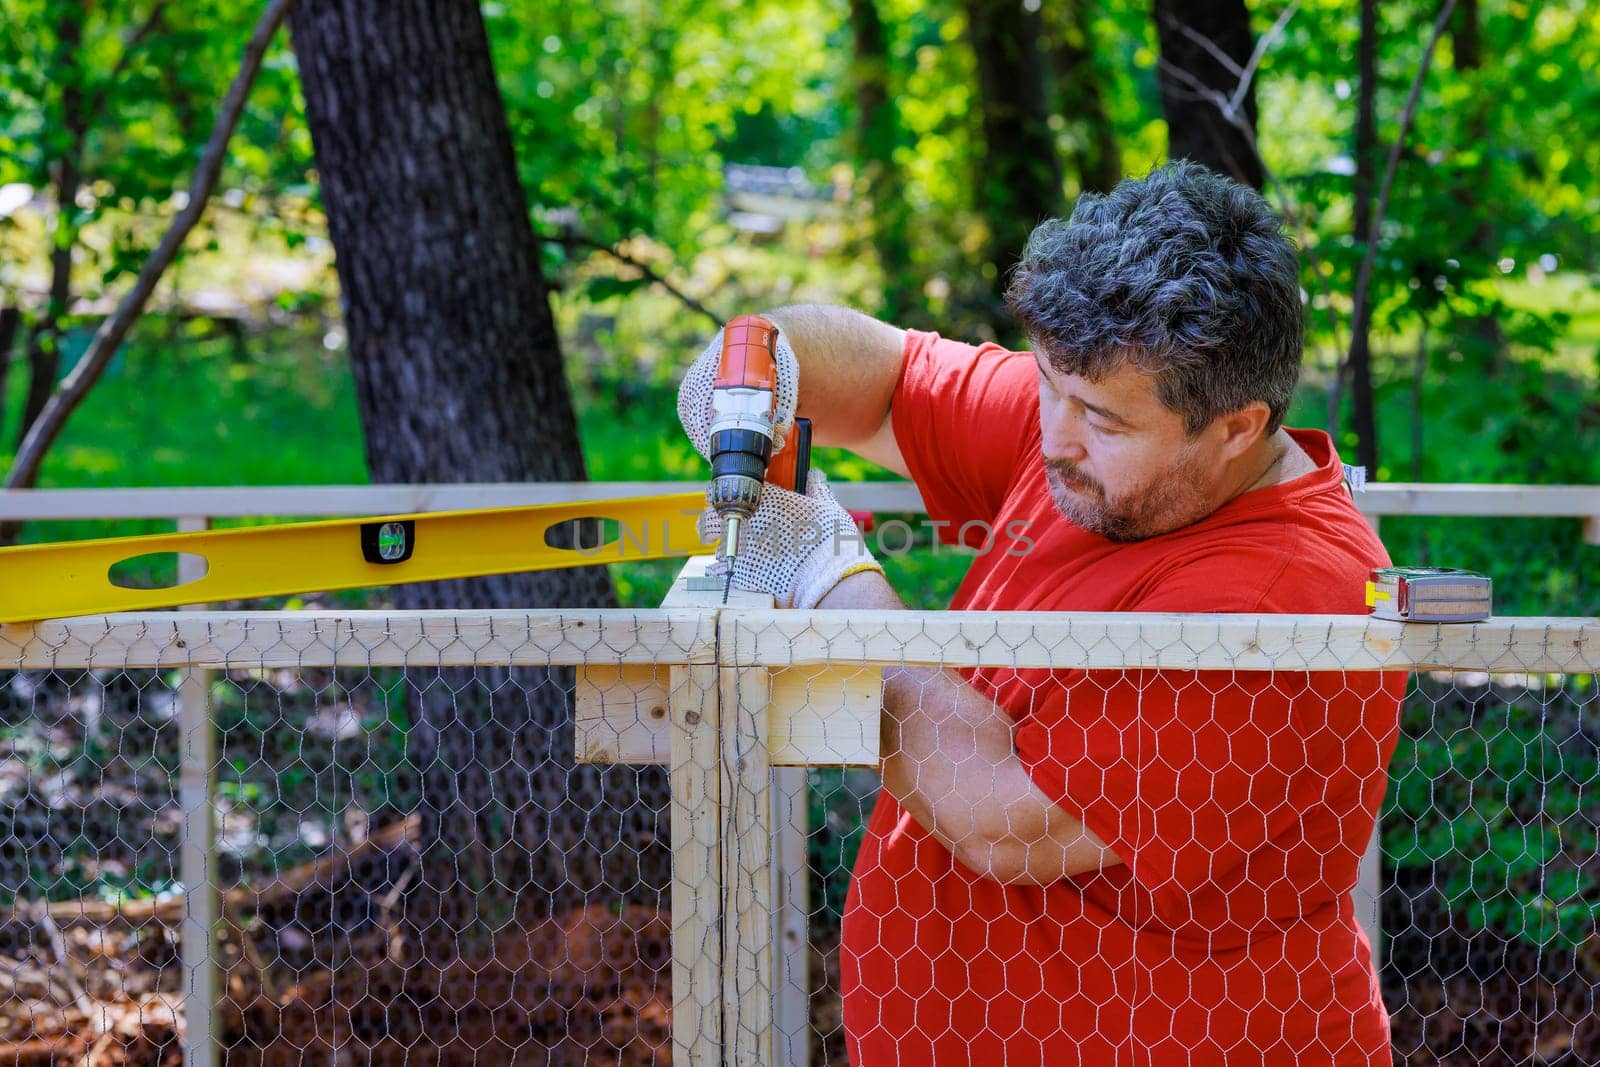 On a farm, a worker uses a screwdriver to install a metal grid in a wooden chicken coop that has been constructed from wood by ungvar